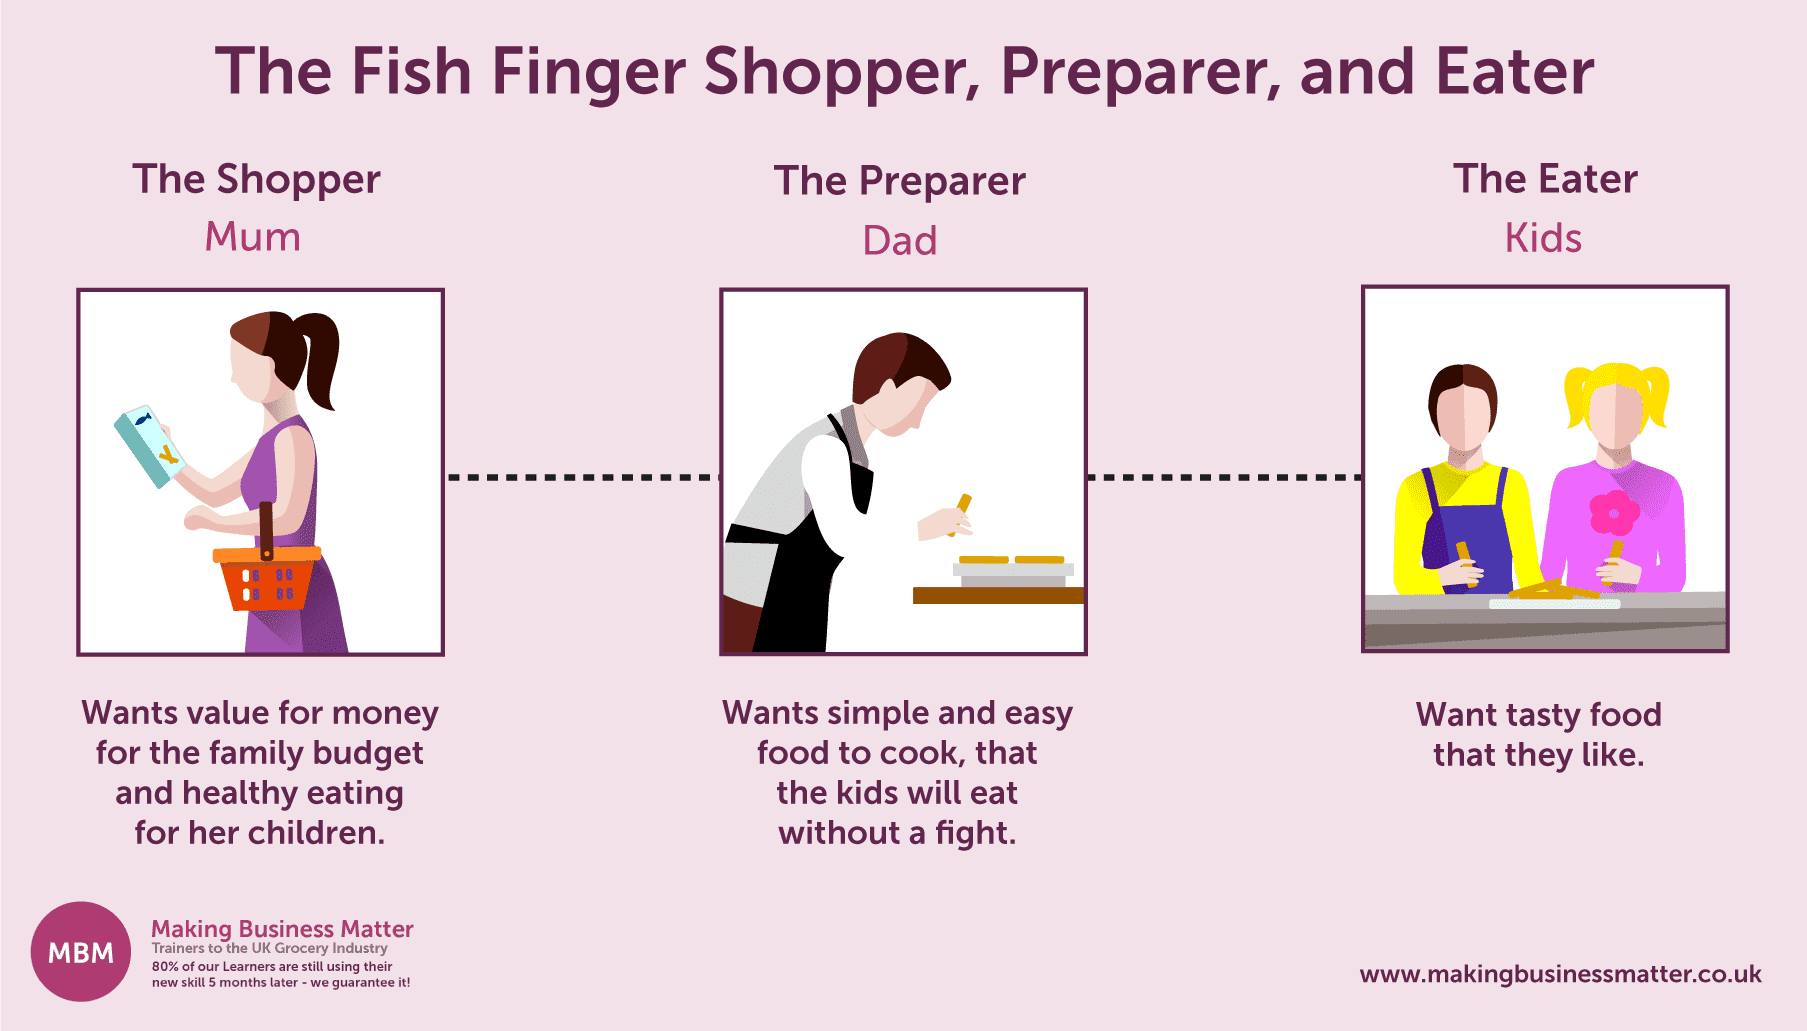 Fish finger infographic showing the three types of customers, shopper, preparer and eater